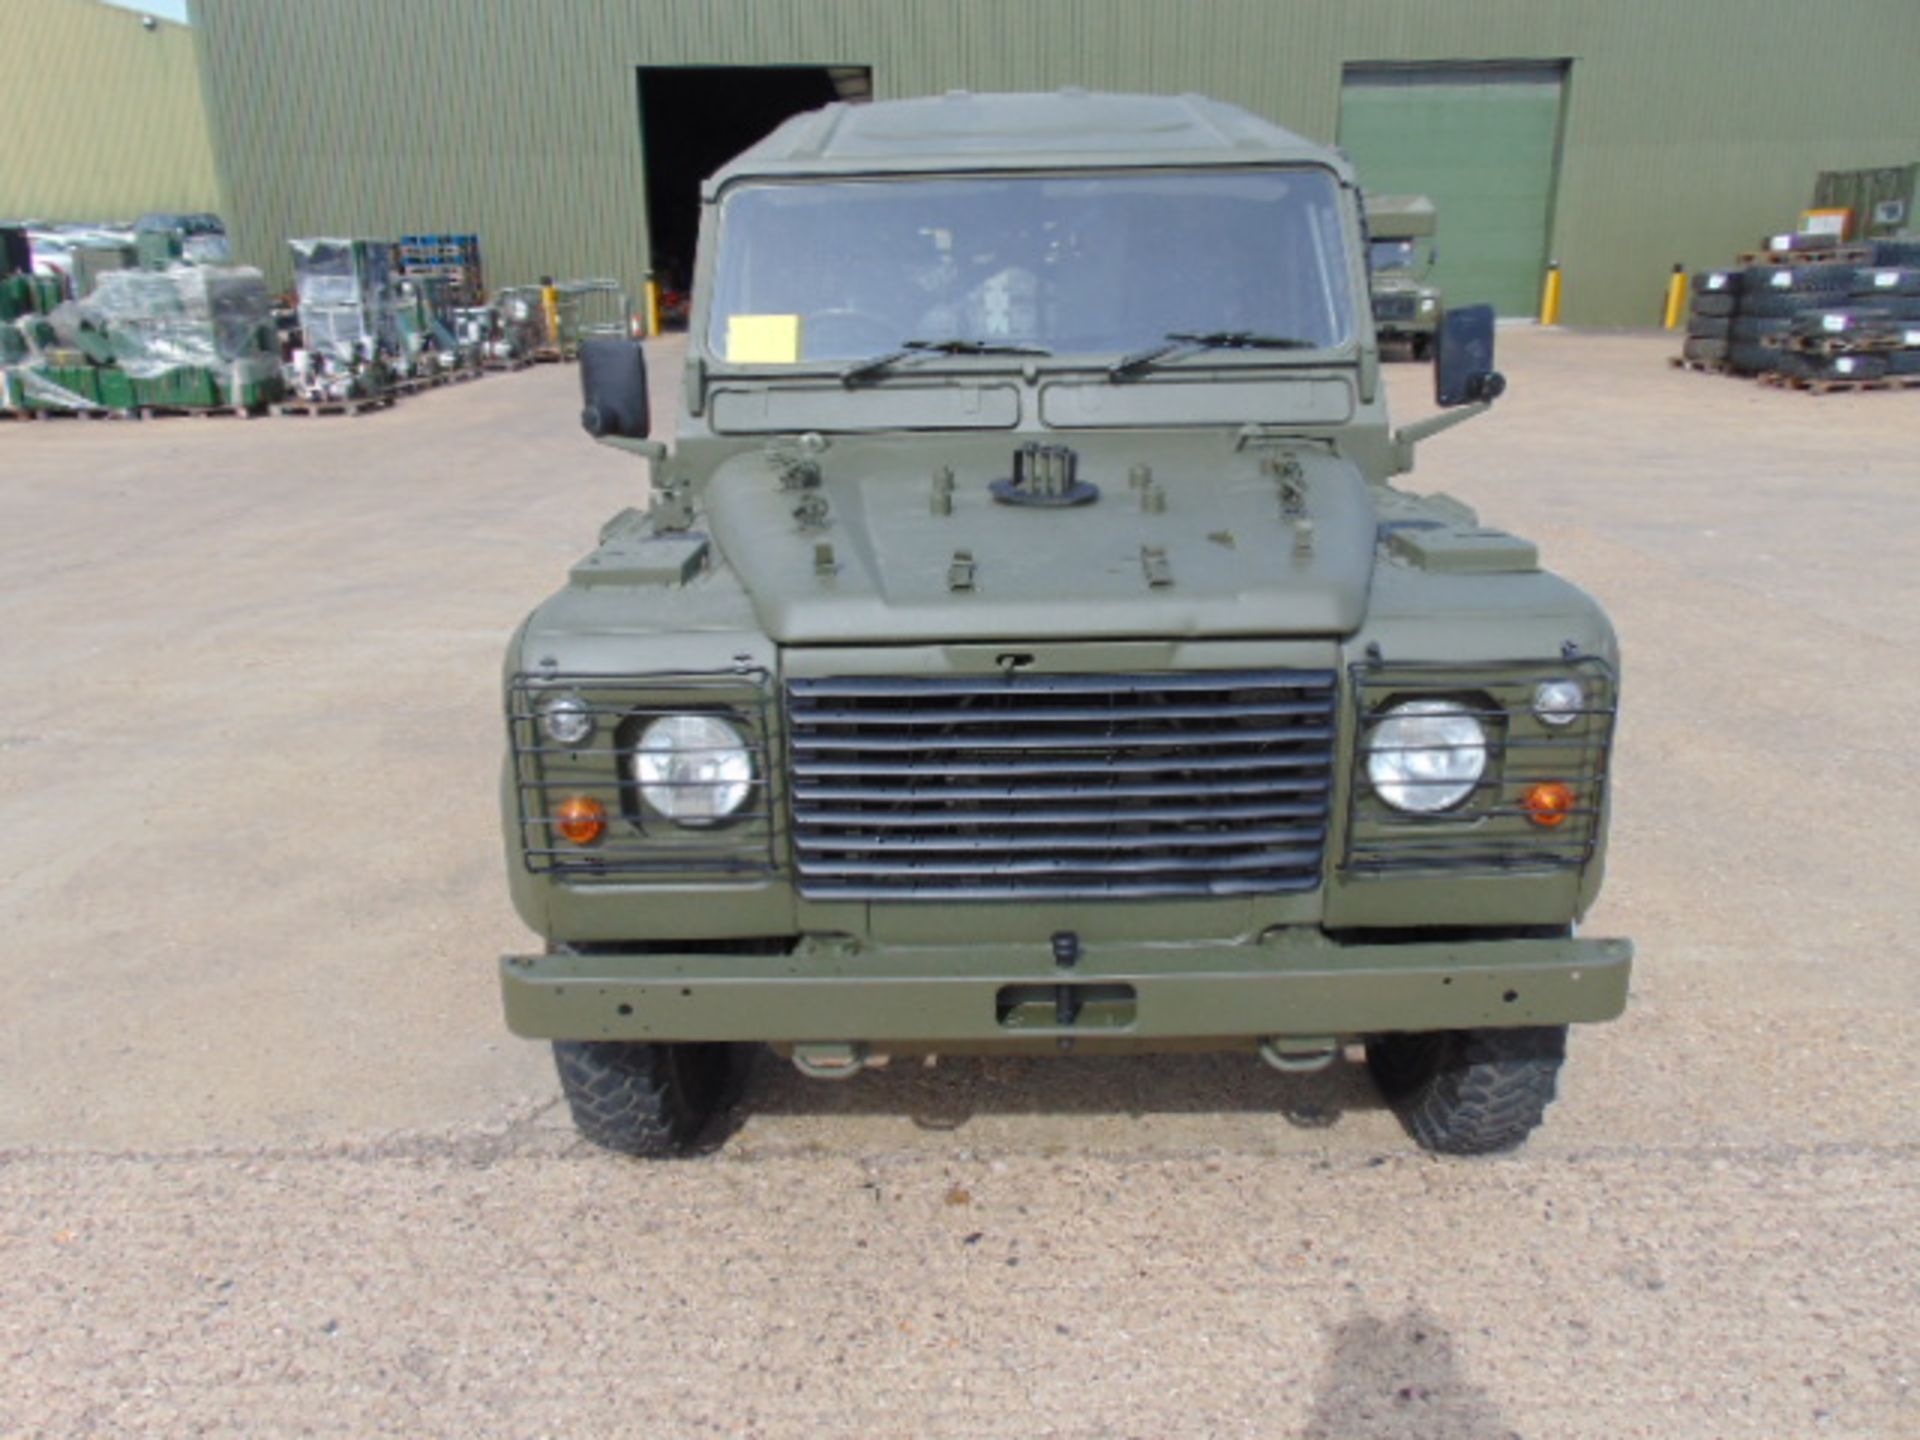 Military Specification Land Rover Wolf 110 Hard Top FFR (Radio Fit) 47,000 miles only - Image 2 of 21